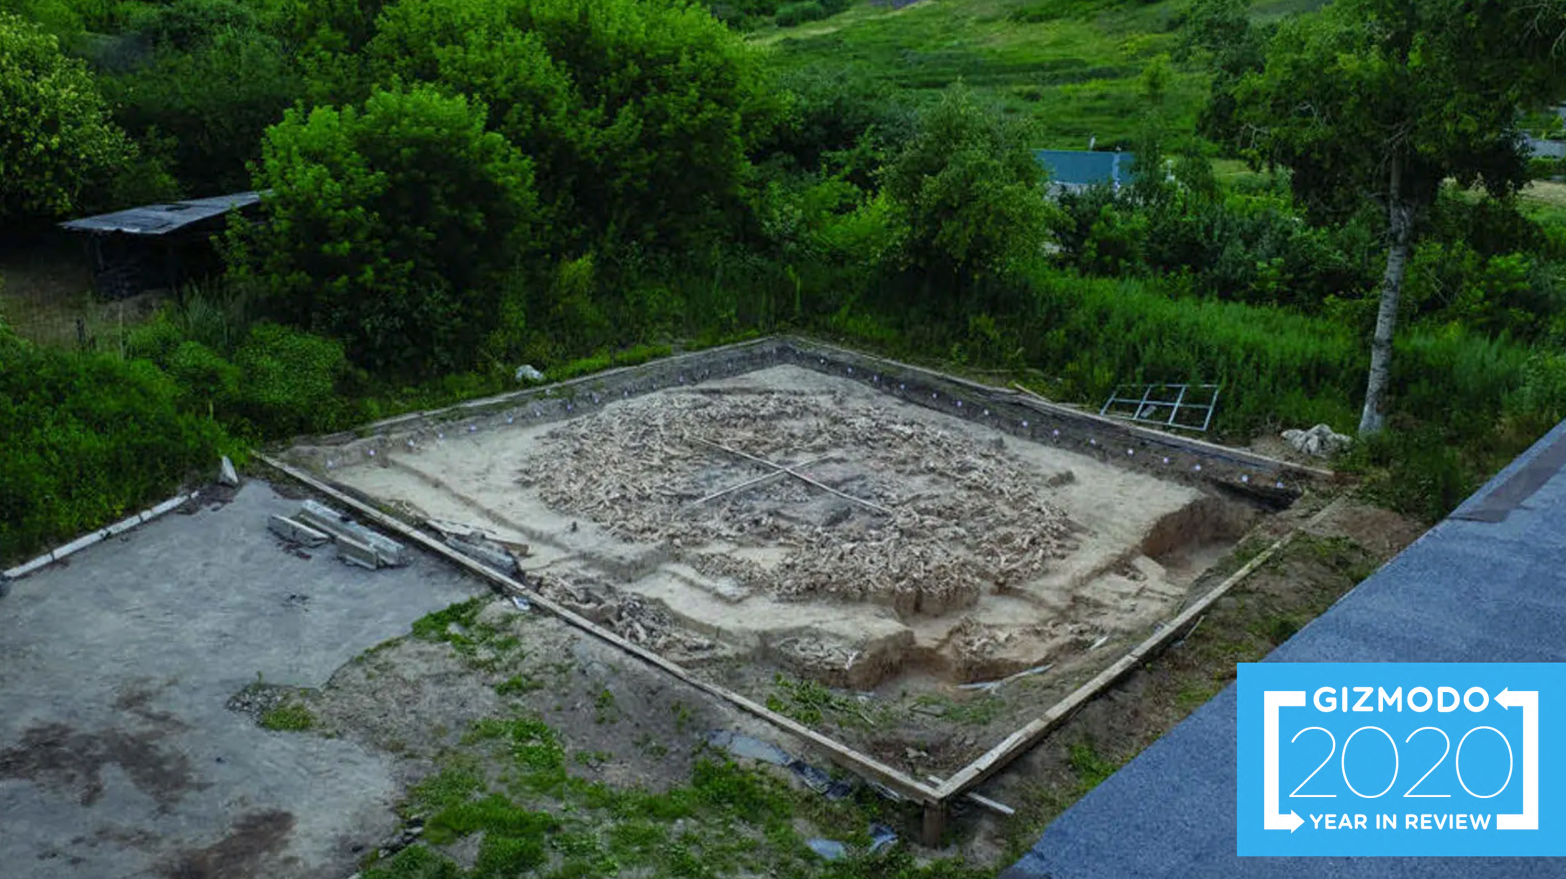 The newly discovered mammoth bone structure at the Kostenki 11 site in Russia. (Image: A. J. E. Pryor et al., 2020/Antiquity)